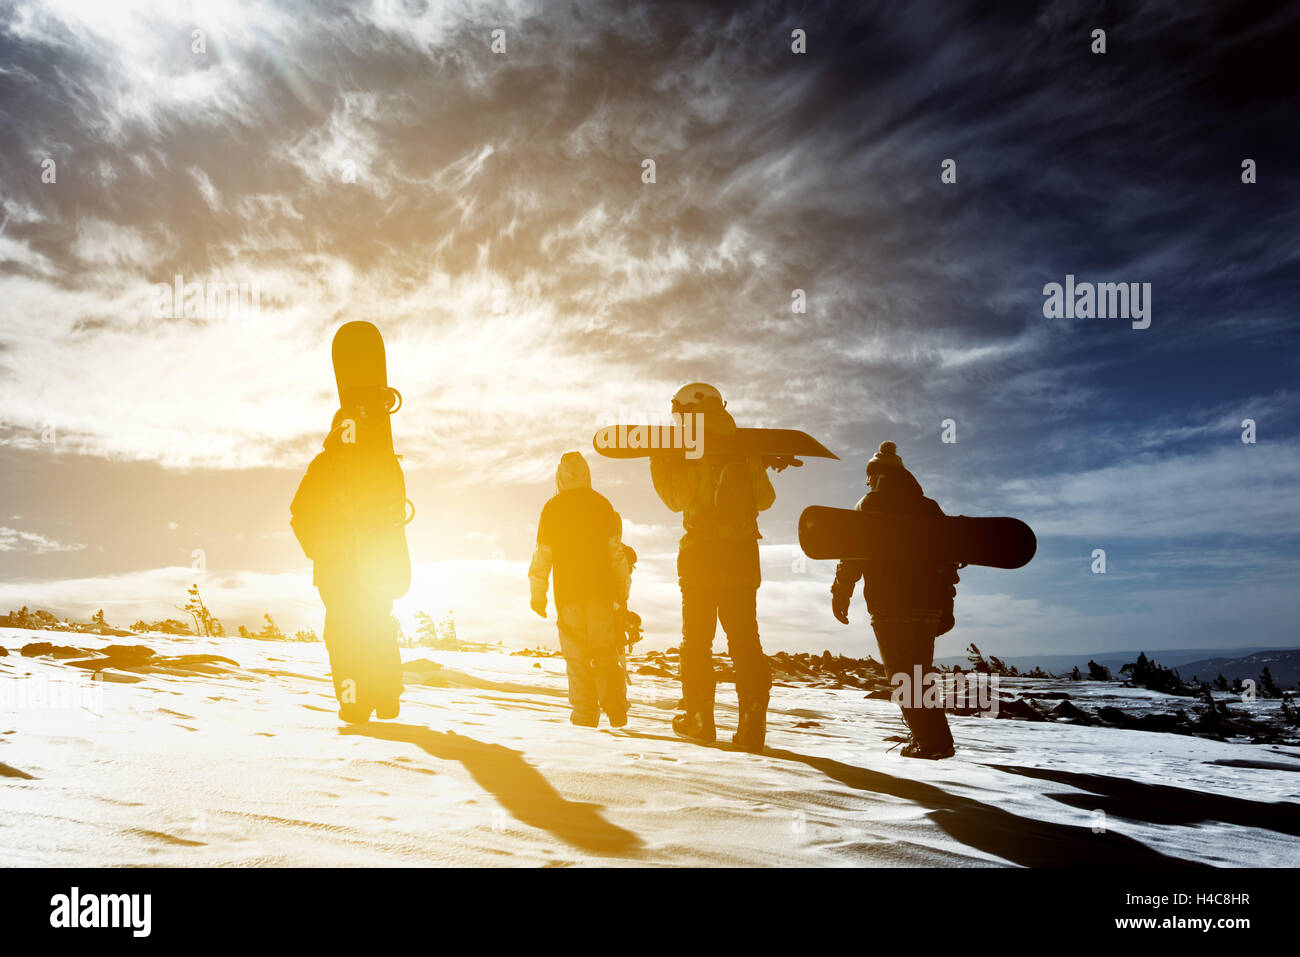 Group snowboarders snowboarding skiing concept Stock Photo